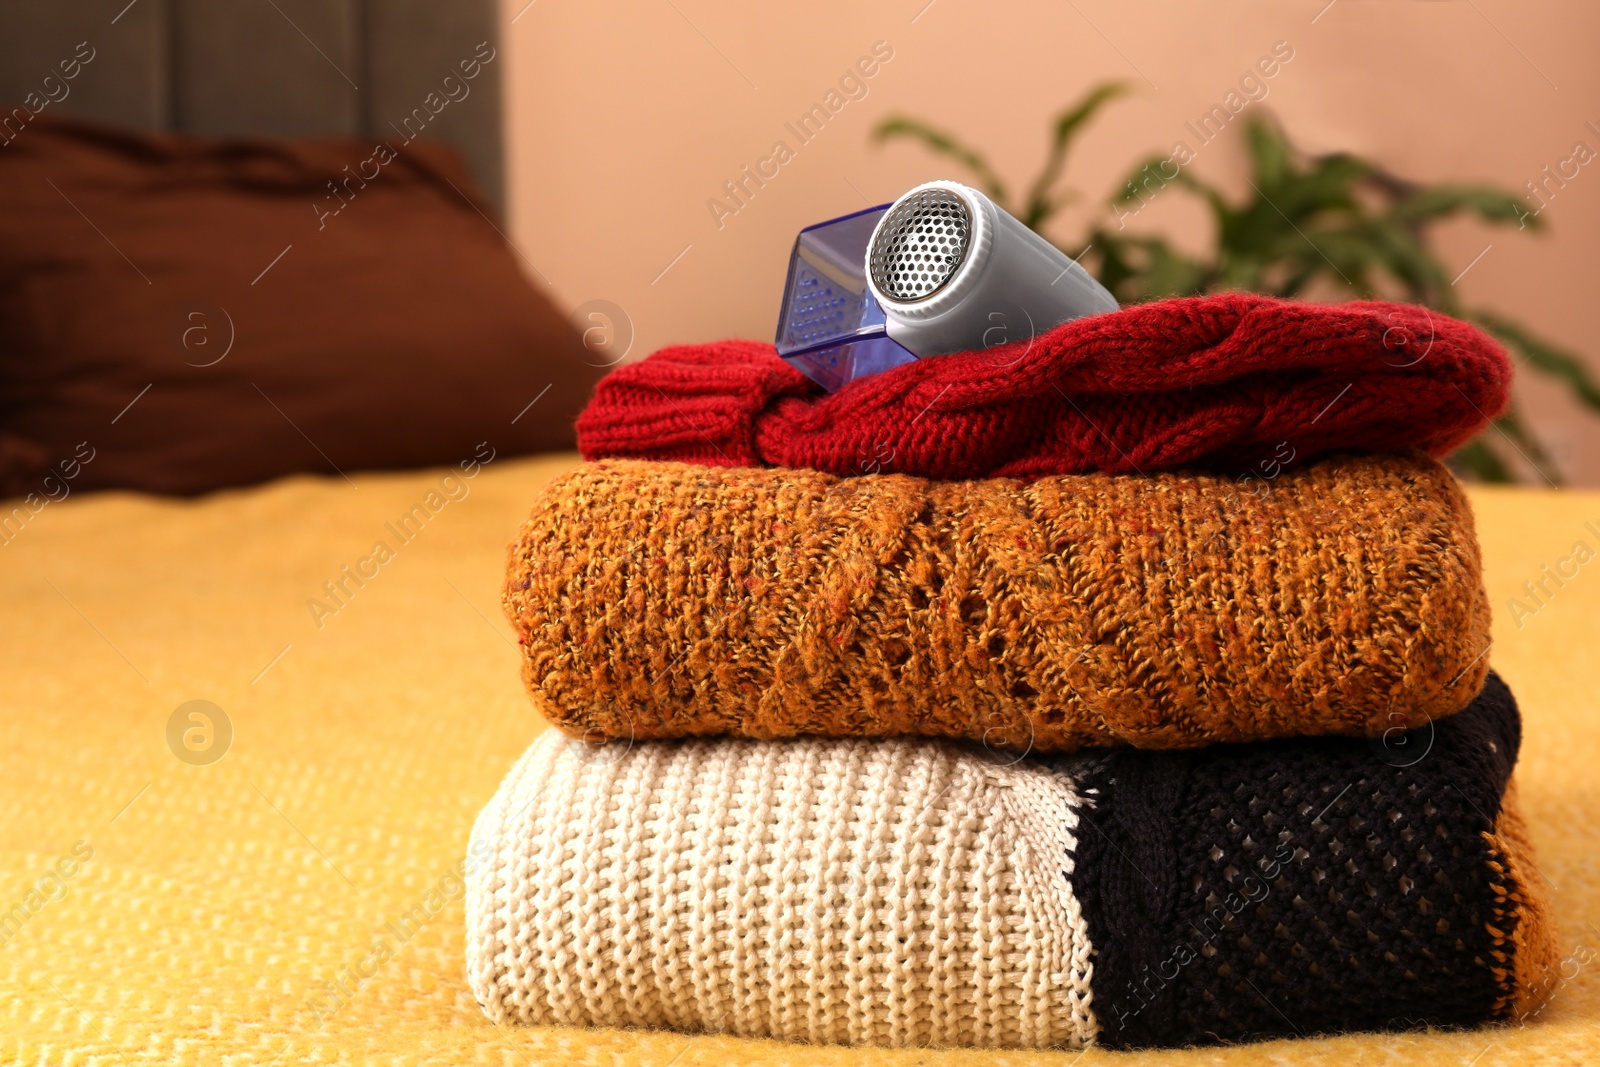 Photo of Modern fabric shaver and knitted clothes on bed indoors, closeup. Space for text